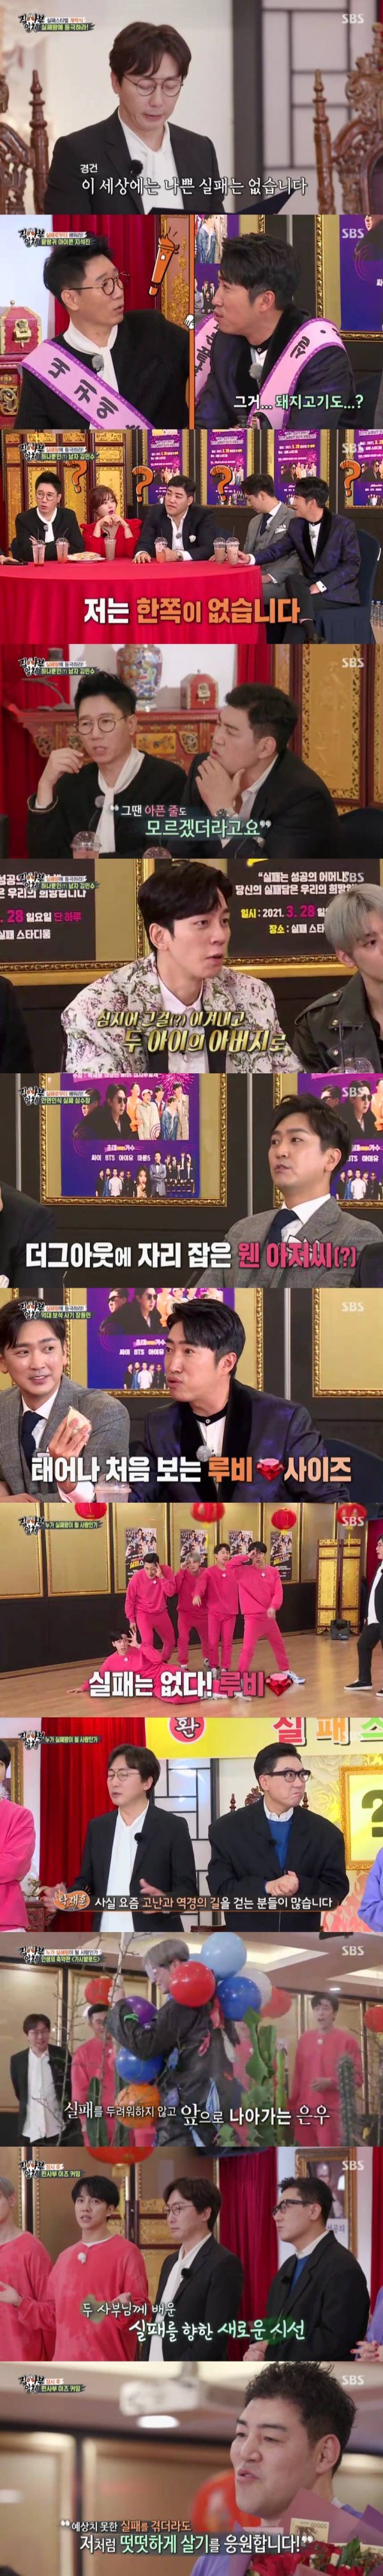 SBS All The Butlers entertainment The Godfather Lee Kyung-kyu won the best one minute by raising expectations just by appearing.According to Nielsen Korea, a TV viewer rating agency on the 29th, SBS All The Butlers TV viewer ratings in the metropolitan area recorded 5.5% in the first part and 6.5% in the second part, 2.9% in the topic and competitiveness index, and 8.2% in the highest TV viewer ratings per minute.On the day of the show, the long-awaited Failure Stival scene with Master Tak Jae-hun, Lee Sang-min, Failure Star Ji Suk-jin, Shim Soo-chang, Kim Min-soo, Jang Dong-min and Solbi was released.First, Tak Jae-hun said, There is no bad Failure in this world.Failure is part of the success, he said. The purpose of the Failure Festival is to come out of Failures experience and support Failure stars re-Top Model. Lee Sang-min said, I hope we will be a big cheer for the tired people.In addition, the King Failure, who gives strength to the tired Failure people, was given a subsidy of 1 million won to burn the Failure stars.Failure stars have been laughing at the extraordinary Failure story, such as the investment Failure and the billion-dollar jewel fraud that have been going through.In particular, Kim Min-soo shocked Failure stars by saying that he lost one testicle during the martial arts Kyonggi.Kim Min-soo said, I was hit by the opponents kick in the second round, but the plastic foul cup, which is a players protective tool, was broken.Then he was hit very strongly in the fourth round. I wanted something to be wrong.Nevertheless, Kim Min-soo said he took a three-minute break and continued Kyonggi.Kim Min-soo said, I did not even know it was sick at the time. The members admired that it is a great thing to play Kyonggi again when it is a pain that can not be imagined.Even Kim Min-soo was cheered by everyone who said he won the Kyonggi that day.Kim Min-soo, who went to the hospital in an ambulance, applauded the story that he had undergone surgery to remove the blood from his legs, saying, I have survived and become a father of two children.Also on this day, All The Butlers Lee Seung-gi, Yang Se-hyeong, Shin Sung-rok, Jung Eun-woo, Kim Dong-hyun and Failure Star Ji Suk-jin, Shim Soo-chang, Kim Min-soo, Jang Dong-min and Solbi are Tak Jae-hun and Lee Sang Top Model on the extraordinary game - prepared by MinThere are many people who walk the path of hardship and adversity these days.I prepared for the life like Innocent Thing Field Road, the intention of walking the road together to the end. He introduced Innocent Thing Field Road Game.This is the victory of a team that blows more balloons as it passes through the Innocent Thing Field. Lee Sang-min added, It is only when we taste a lot of Failure, endure the trials and finally get out that success is in front of us.I will go without giving up on any Innocent Thing field in front of me, said Jung Eun-woo, who became the Top Model.Thanks to the support of the members, Jung Eun-woo passed through the Innocent Thing Field safely and left 11 balloons, but Kim Min-soo left 15 balloons and the Failure Star team won.Since then, the group Game In the Well has been conducted, and Kim Min-soo has won the final result of Failure King.Kim Min-soo said, I hope I will live like a man like me even if I have an unexpected failure.On the other hand, at the end of the broadcast, members gathered in the mountain of Inje, Gangwon Province were revealed.Is not it a natural master? In front of the members who wondered about the identity of the master, someone who said that he was a master of the master appeared.As he was leading the members to the place where Master is, he explained to Master, Master had a rich movie and honor that was unrivaled when he was in the city, but he entered the school a month ago, saying, I will leave the world before the world abandons me.At the end of the mountain trail along the school, I saw the back of the Master, who was in the valley with a questionable purple dress.The members said, Are you old? And Are you doing that all day? Yang Se-hyeong said, It is only a month old, but it is a geek.The identity of the Master was the entertainment The Godfather Lee Kyung-kyu.Lee Kyung-kyu said, I invited him to this deep mountain to tell me how to live for 10 years in the entertainment industry. He laughed, saying, I eat it day by day for the next 10 years.The scene in which Lee Kyung-kyu appeared in front of the members in the same way as Doin on the day raised expectations and won the best one minute with 8.2% of TV viewer ratings per minute.